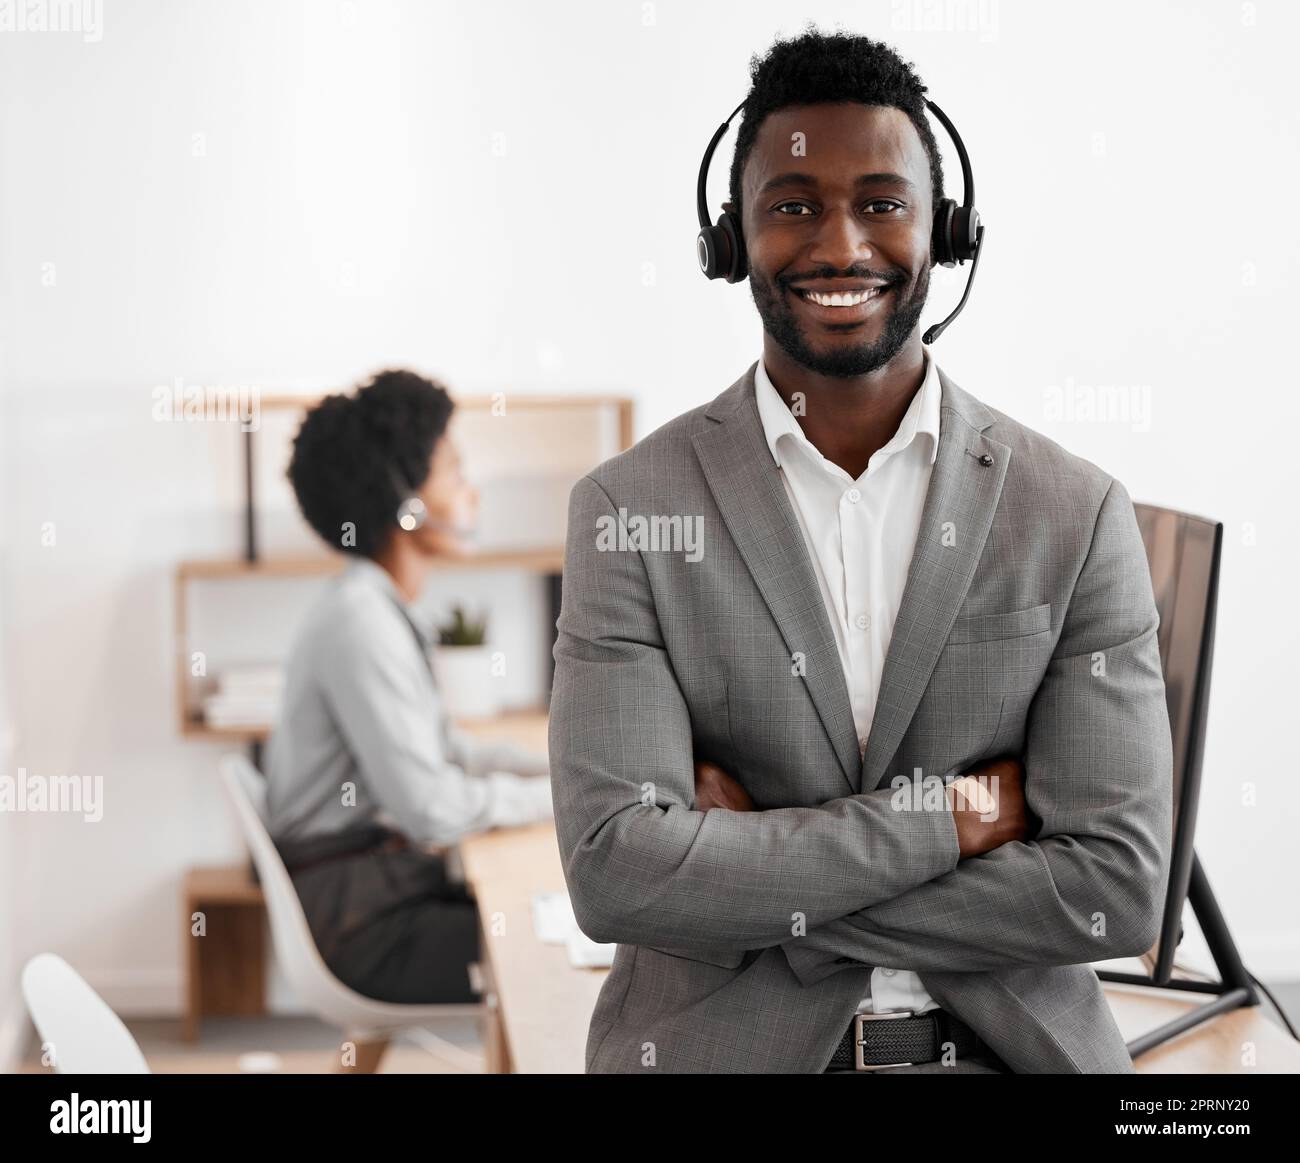 Call center, customer service and crm consultant wearing headset and looking happy in telemarketing company. Portrait of confident black man in contact us and sales support department for assistance Stock Photo